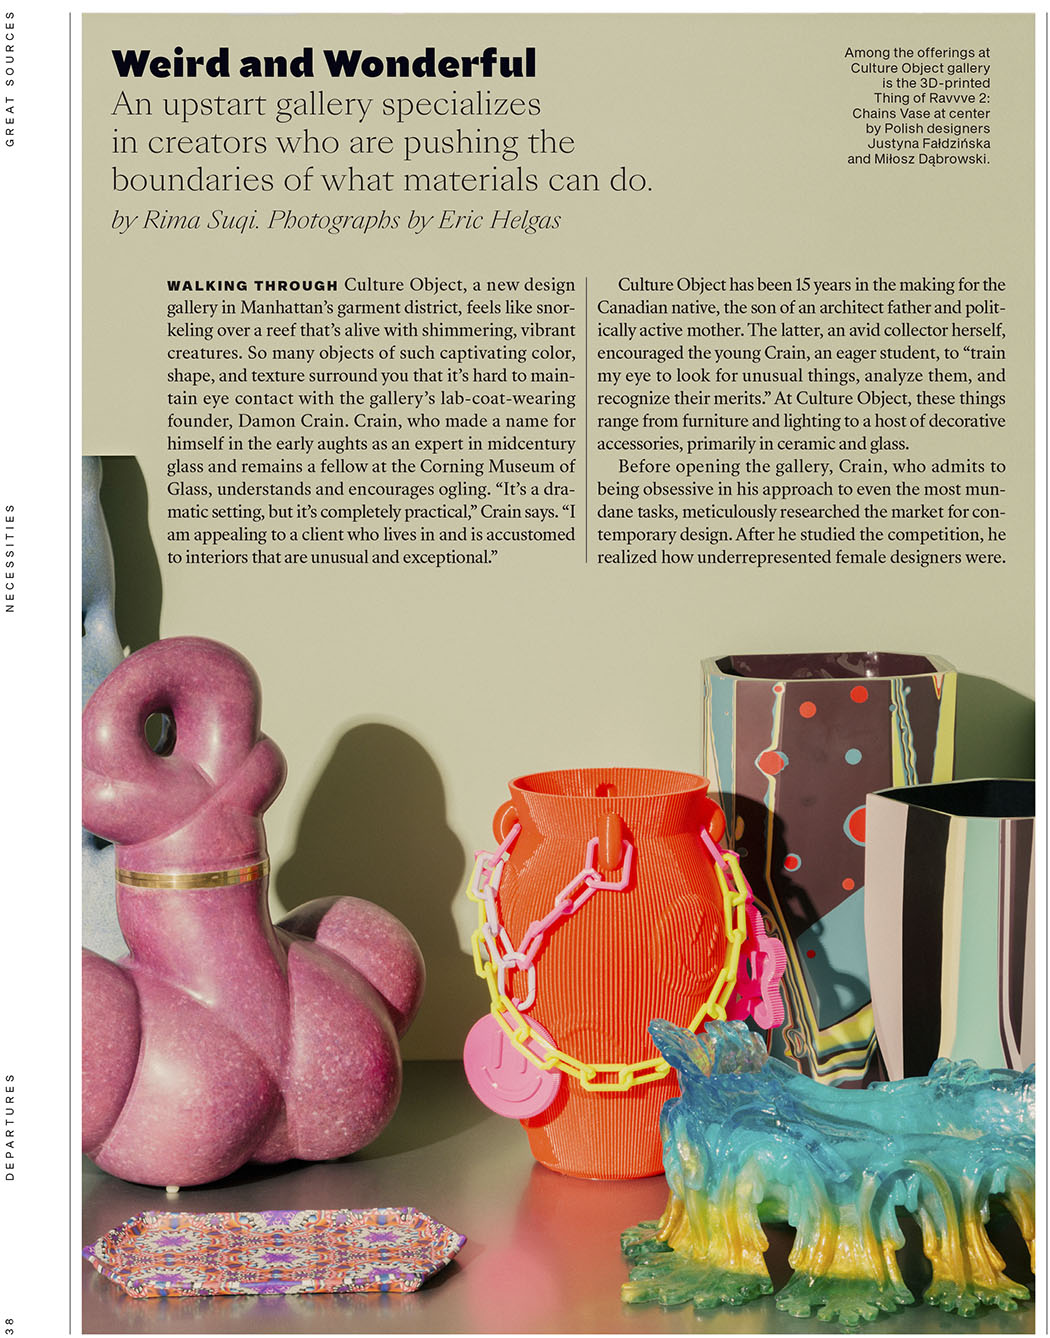 Departures Home Design Magazine SPring 2021 Weird and Wonderful Culture Object